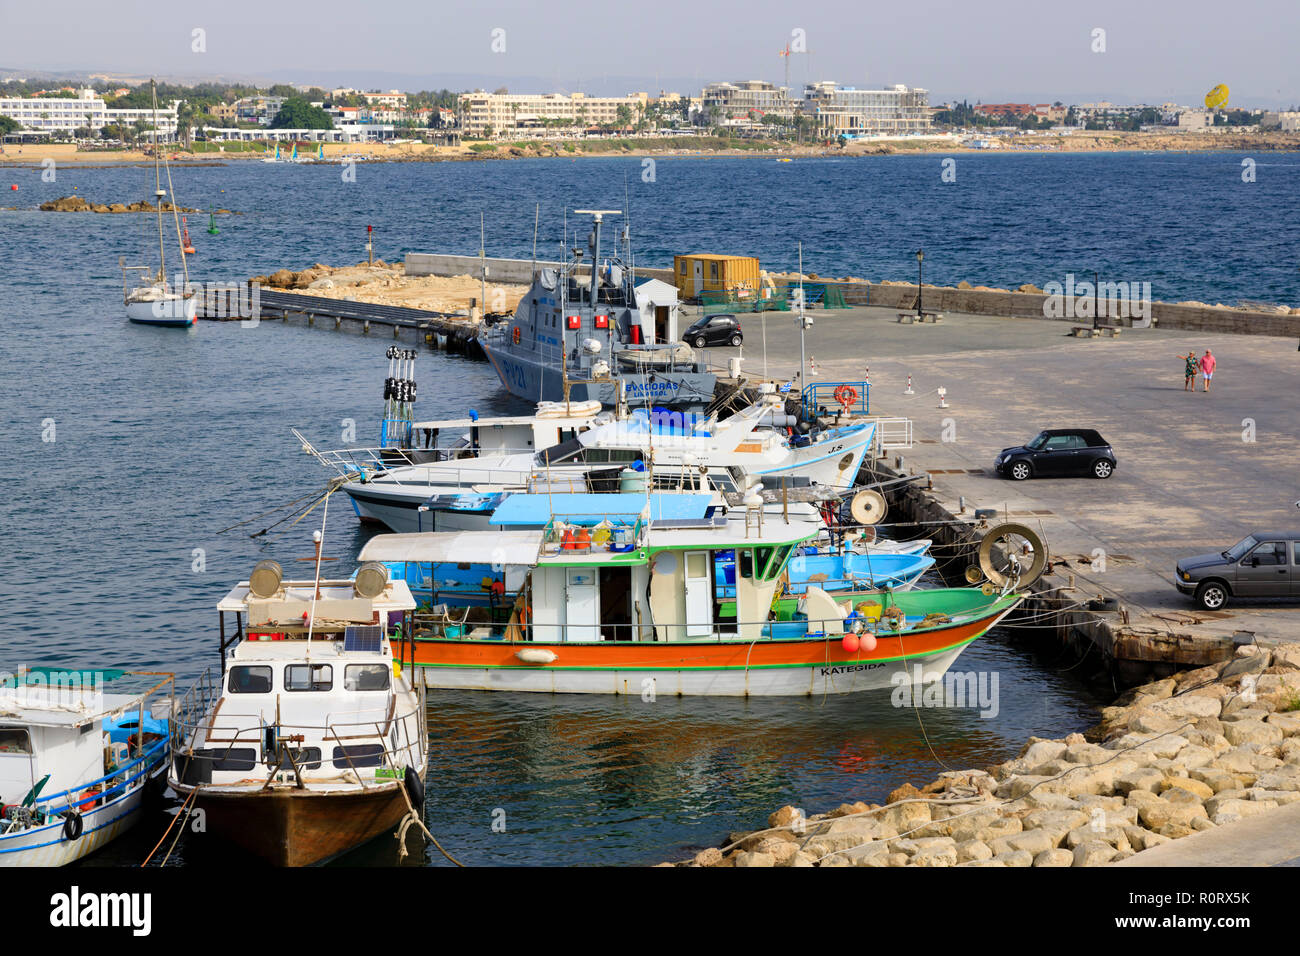 Paphos harbour, Cyprus October 2018. Local traditional fishing boats share the quay with the police coastguard boat. Stock Photo